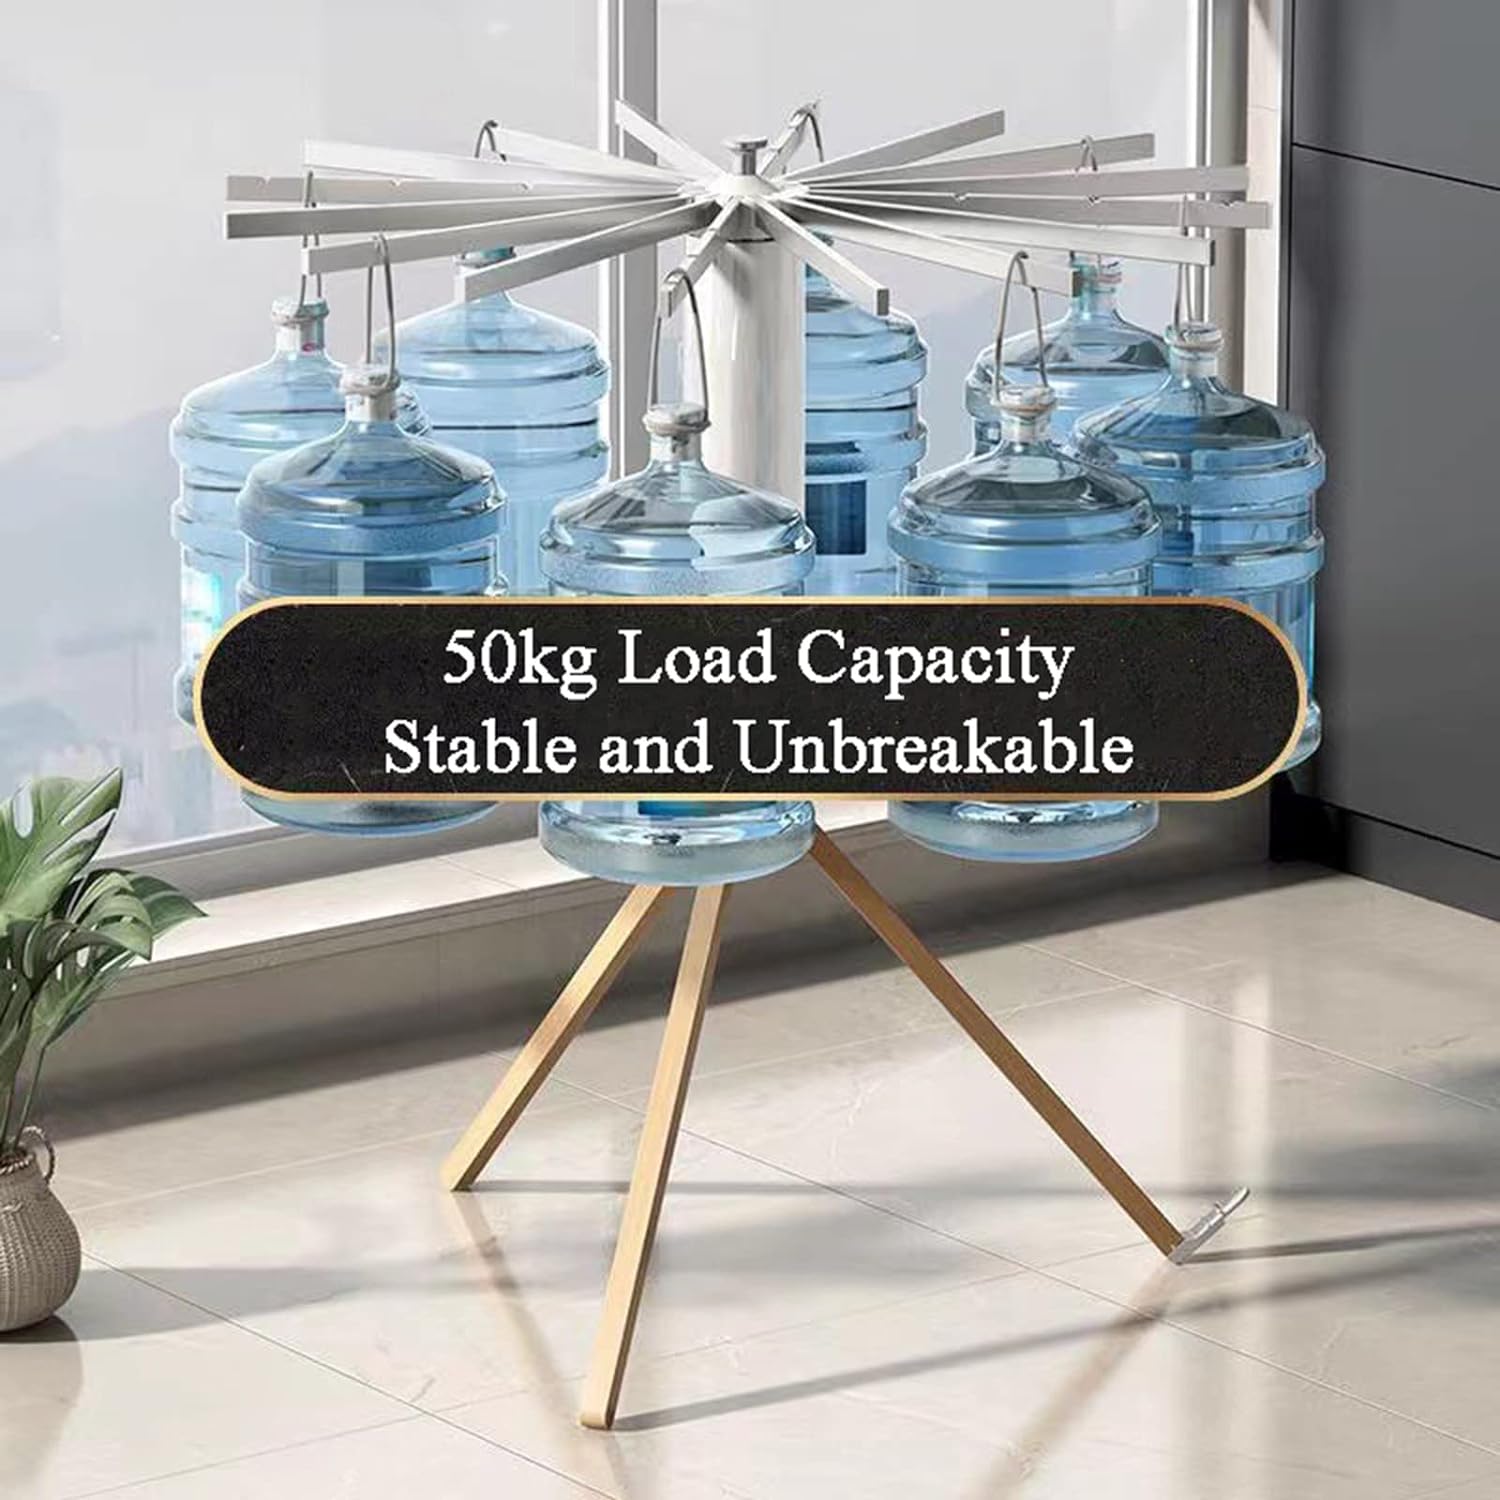 The Foldable Clothes Hanger Airer Umbrella is an installation-free laundry rail with 16 drying rods, boasting a 50 kg capacity for stability and durability